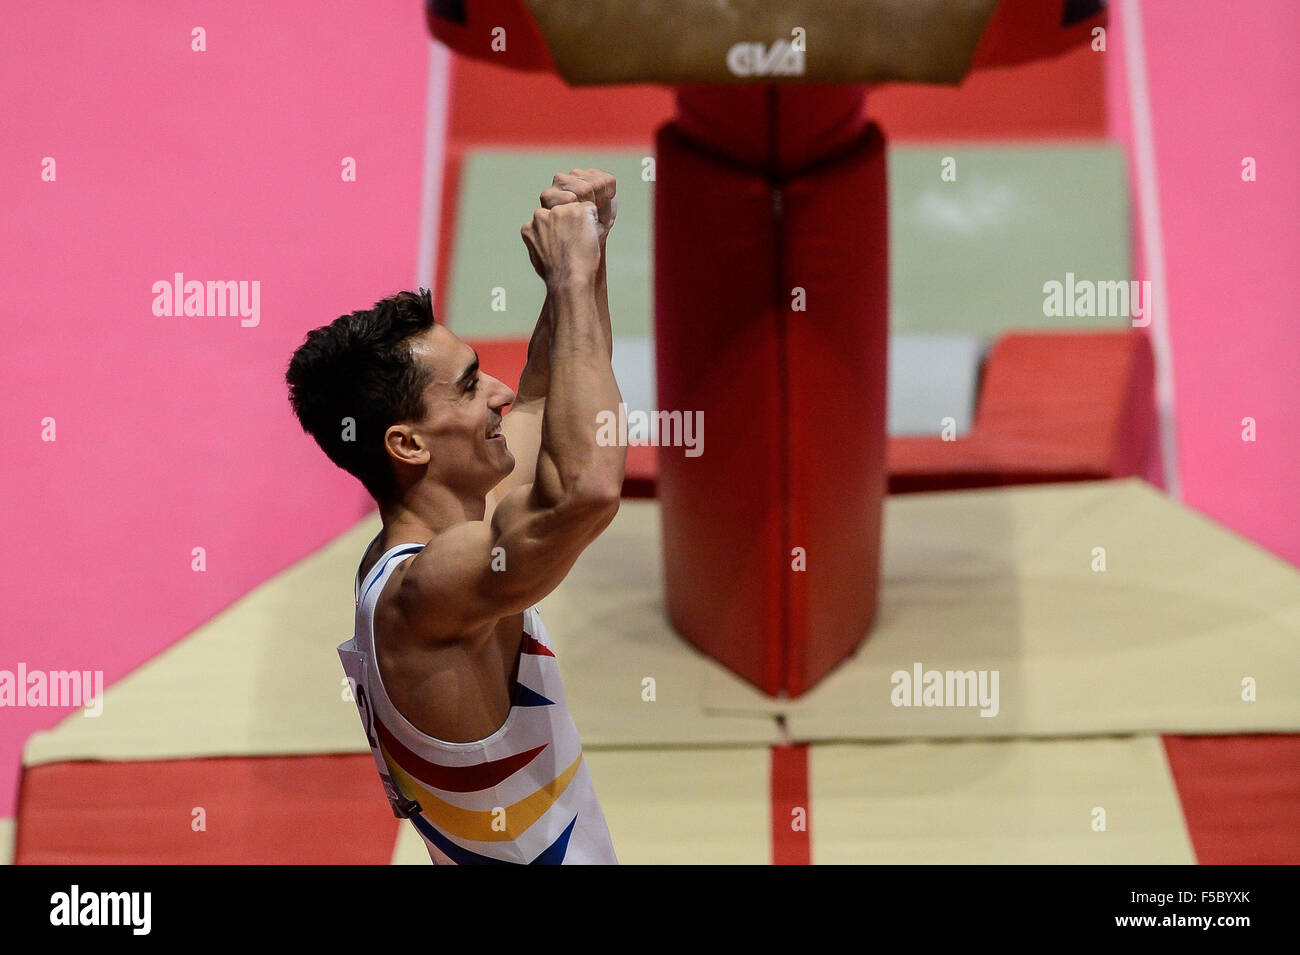 Nov. 1, 2015 - Glasgow, United Kingdom - MARIAN DRAGULESCU from Romania competes on the vault during the last day the event finals of the 2015 World Gymnastics Championships held in Glasgow, United Kingdom.   DRAGULESCU won the silver medal for his vault. (Credit Image: © Amy Sanderson via ZUMA Wire) Stock Photo